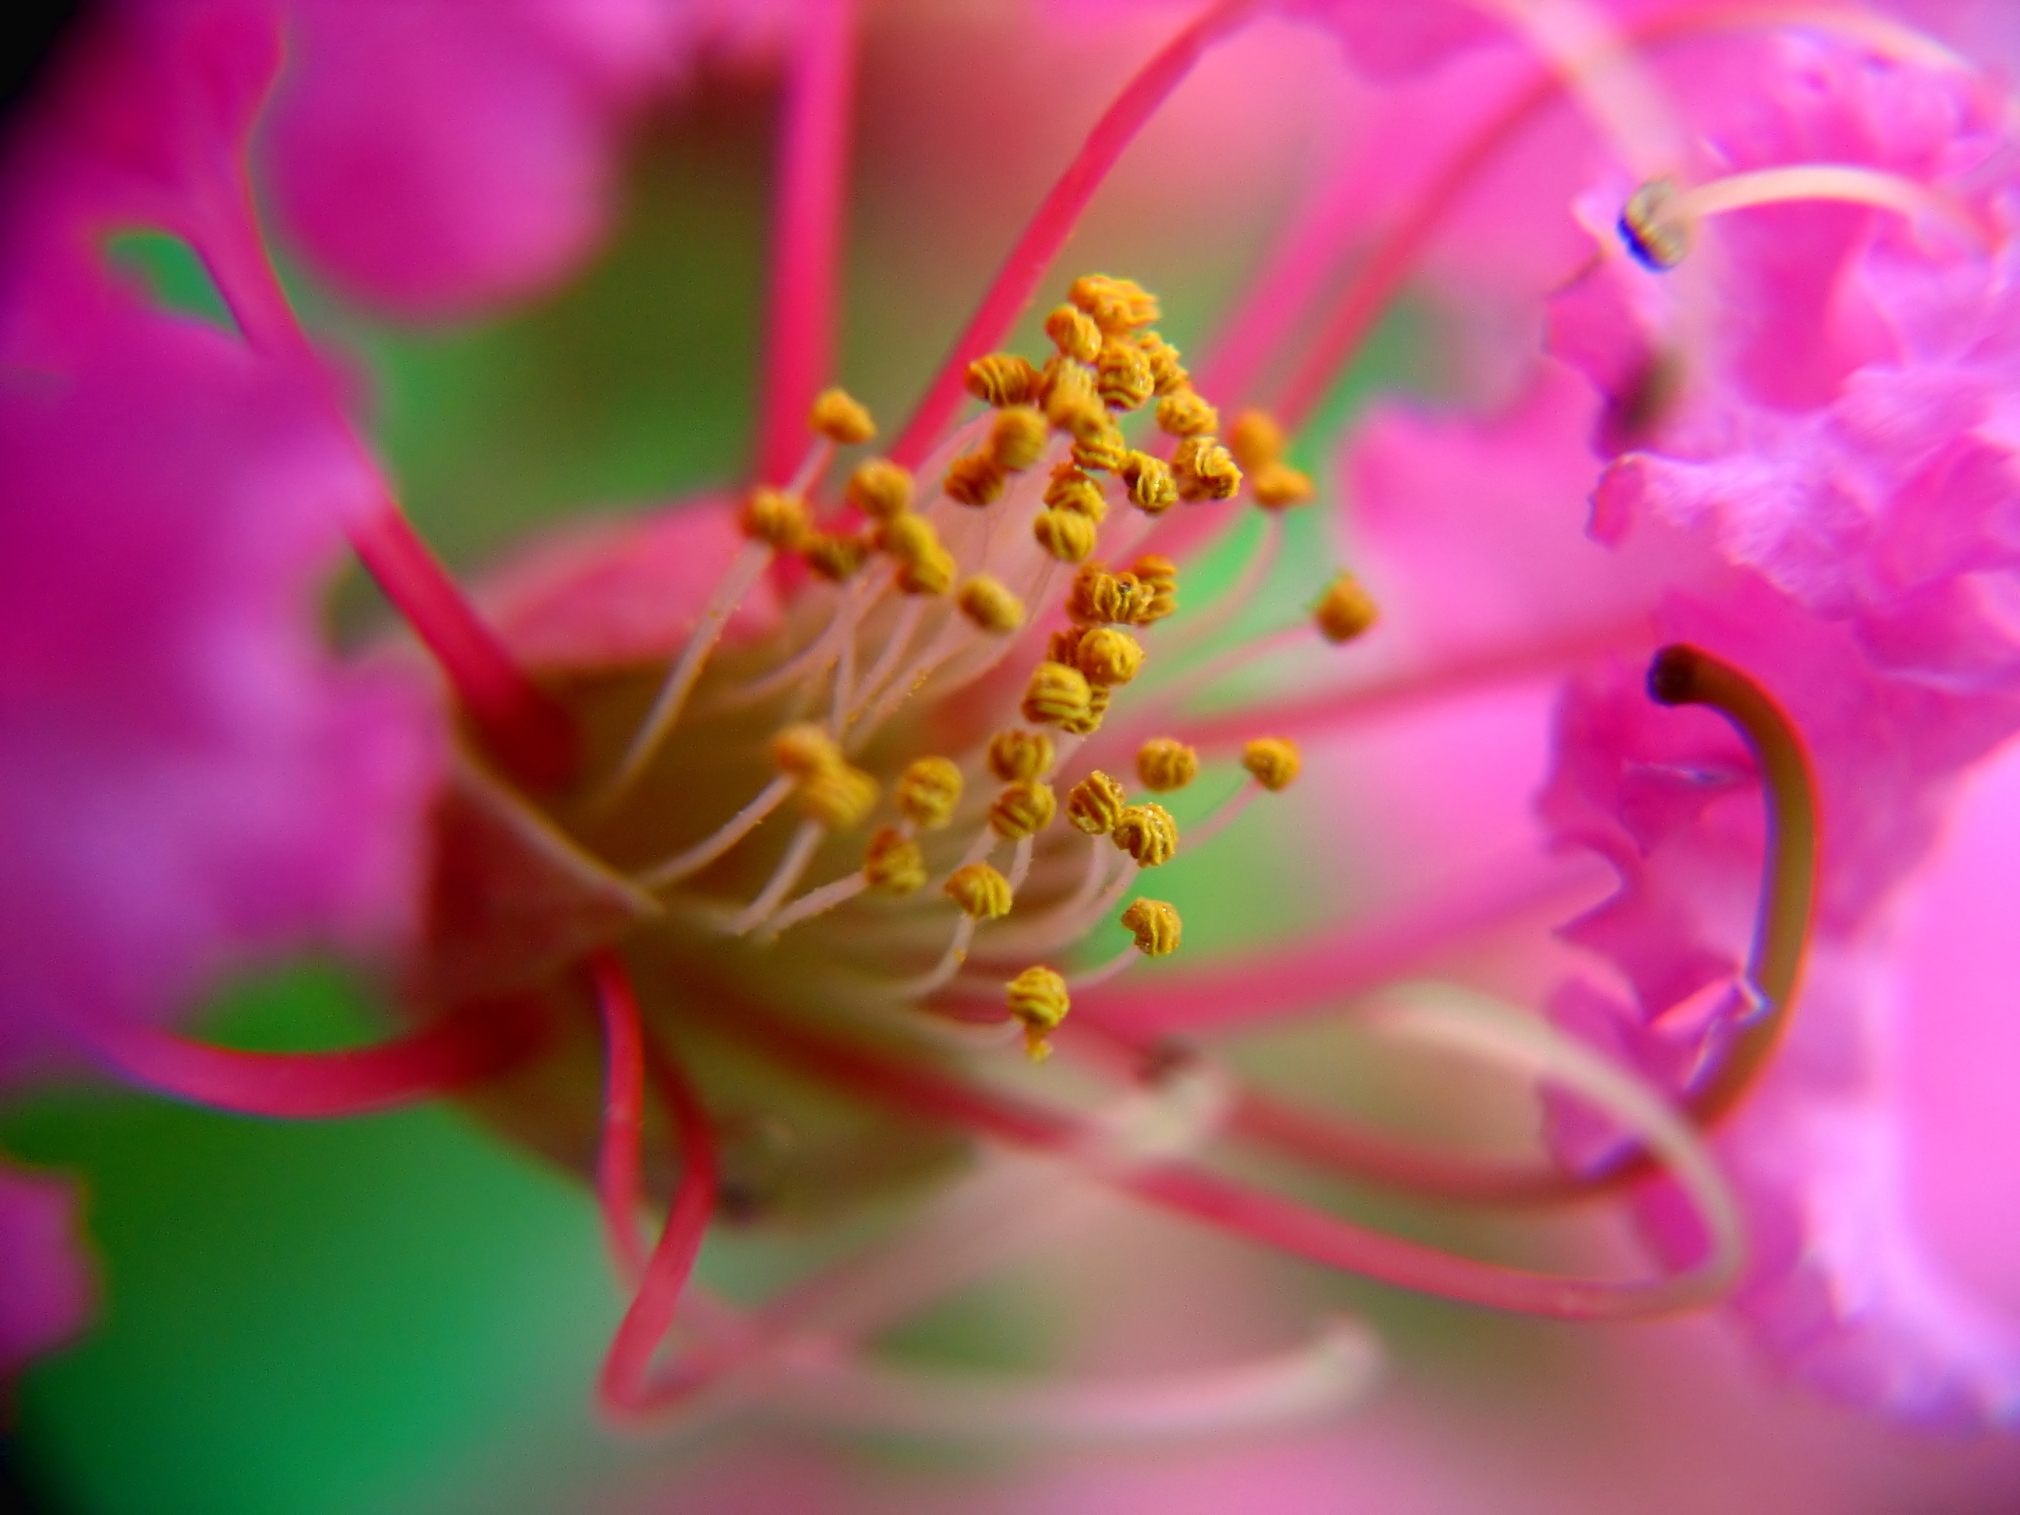 Inside view of a small flower photo